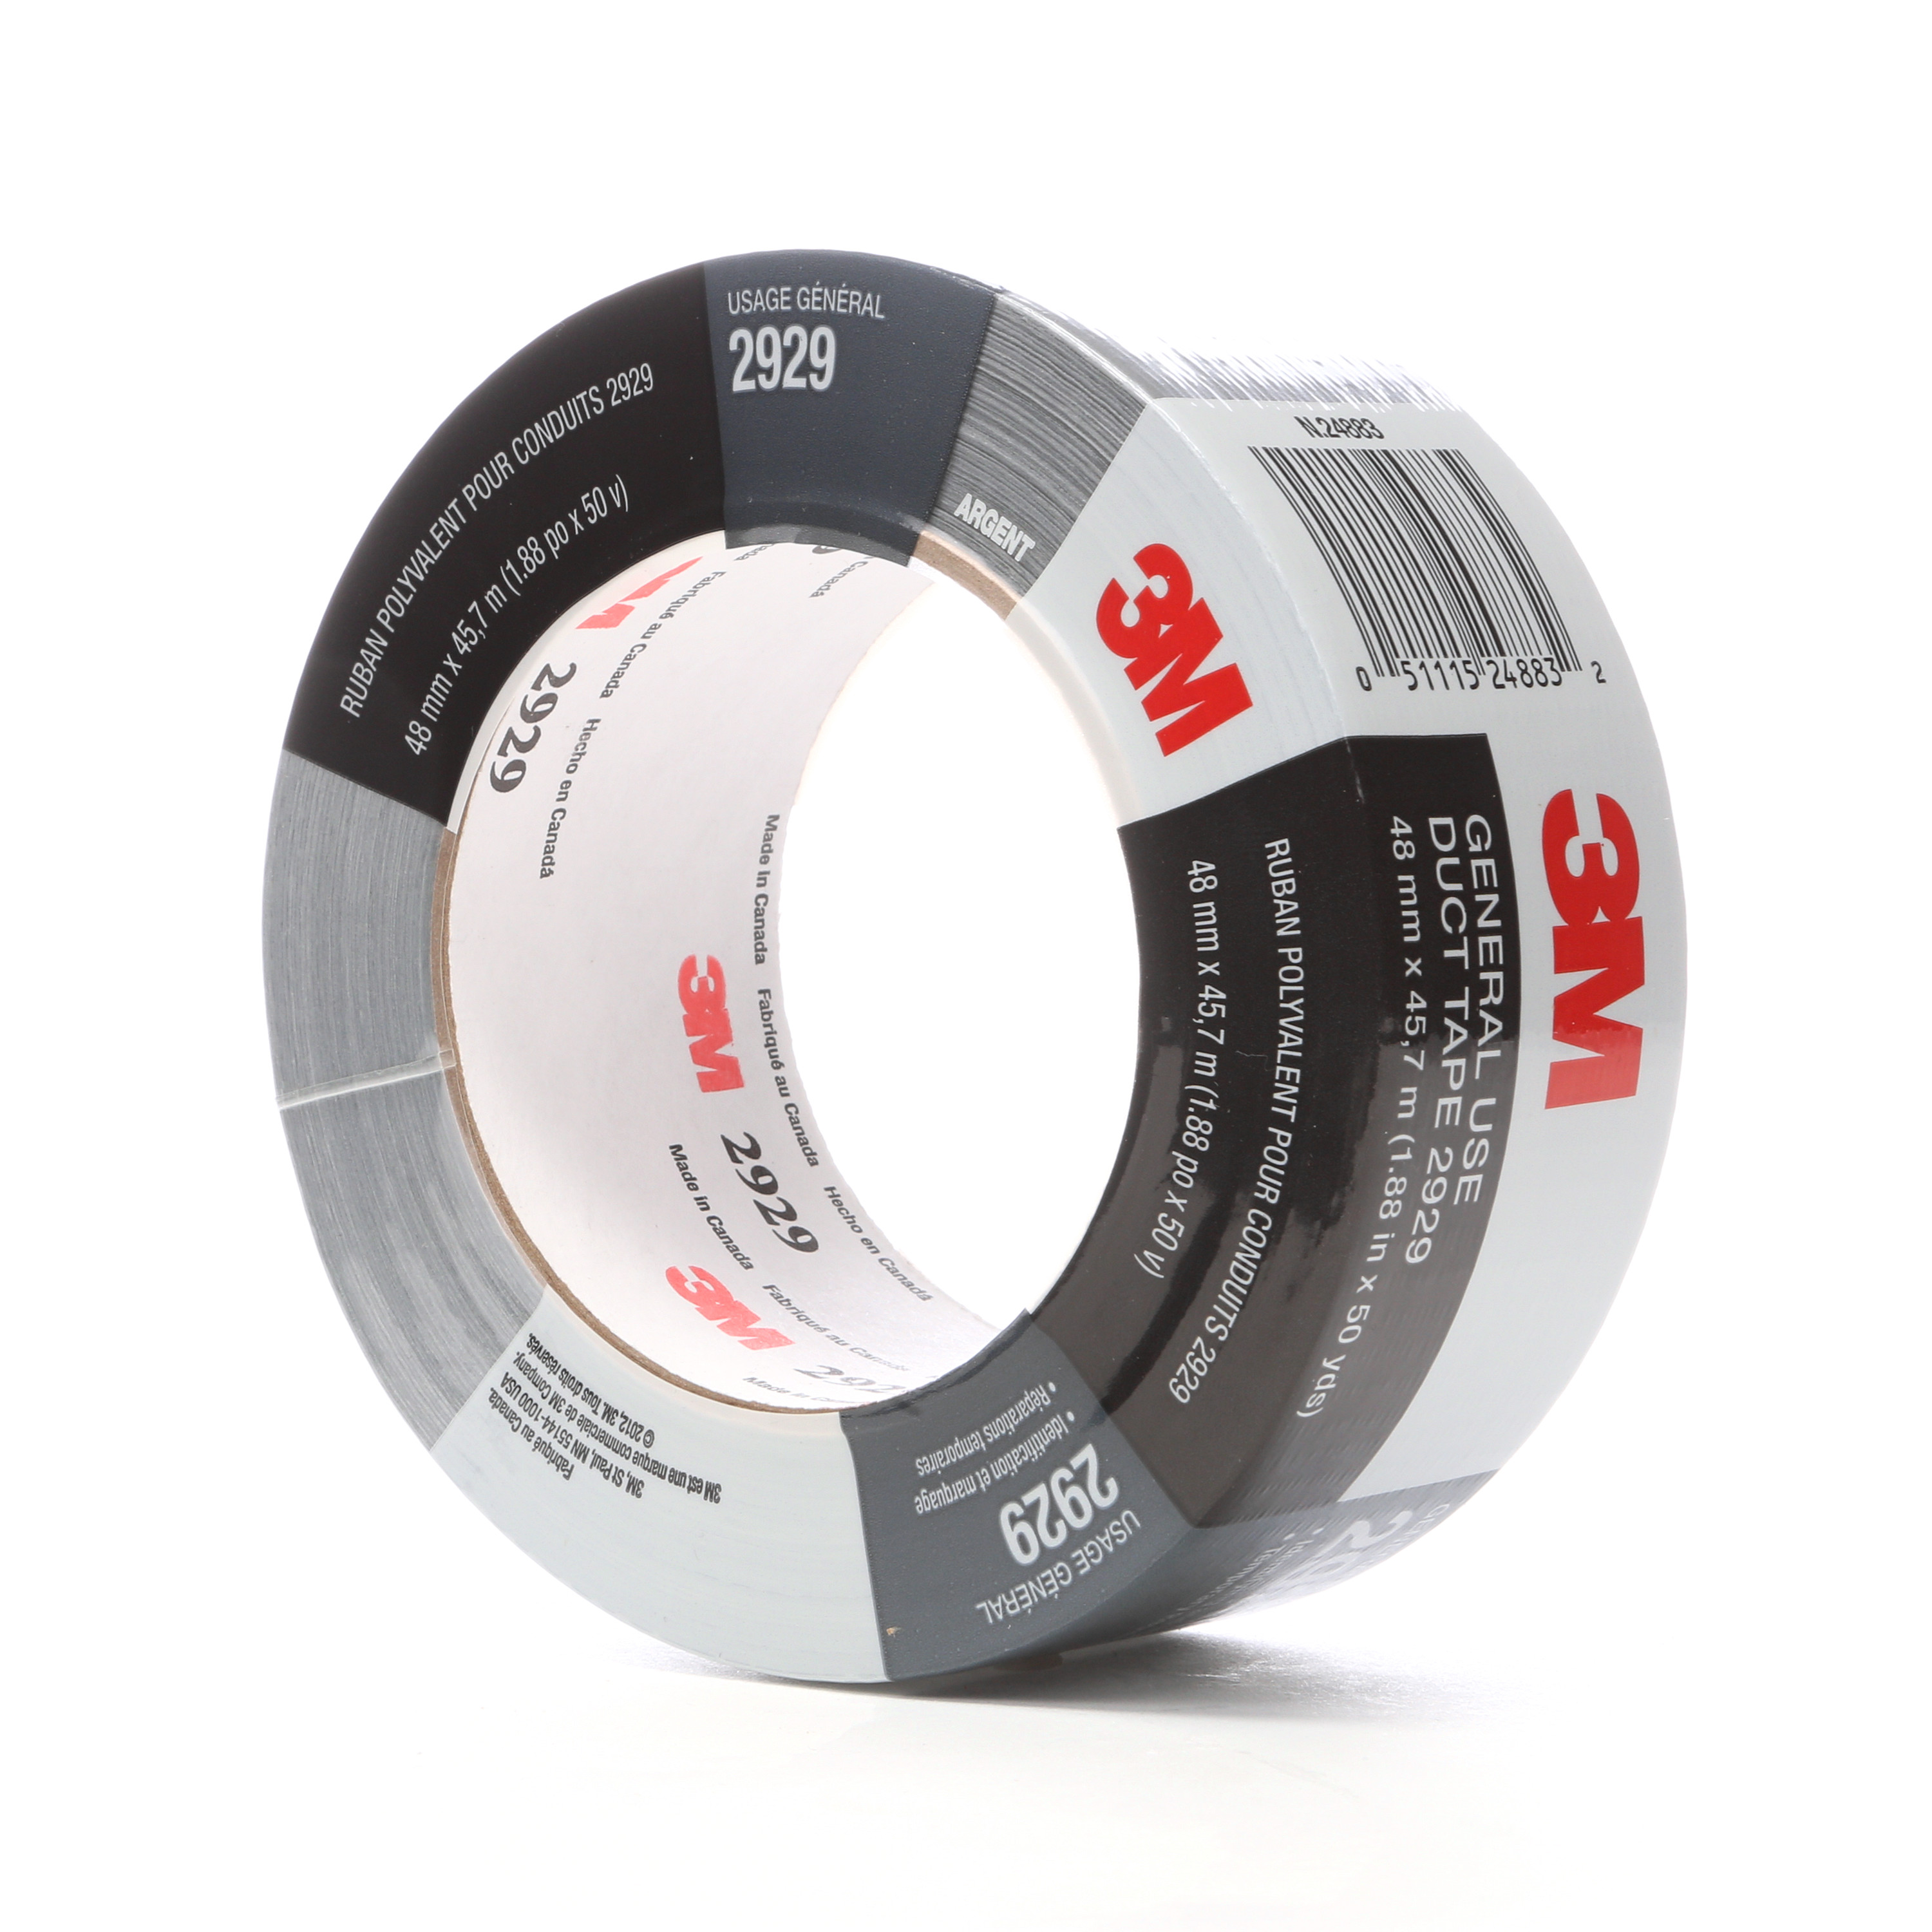 3M™ General Use Duct Tape 2929, Silver, 1.88 in x 50 yd, 5.5 mil, 24 per
case, Individually Wrapped Conveniently Packaged